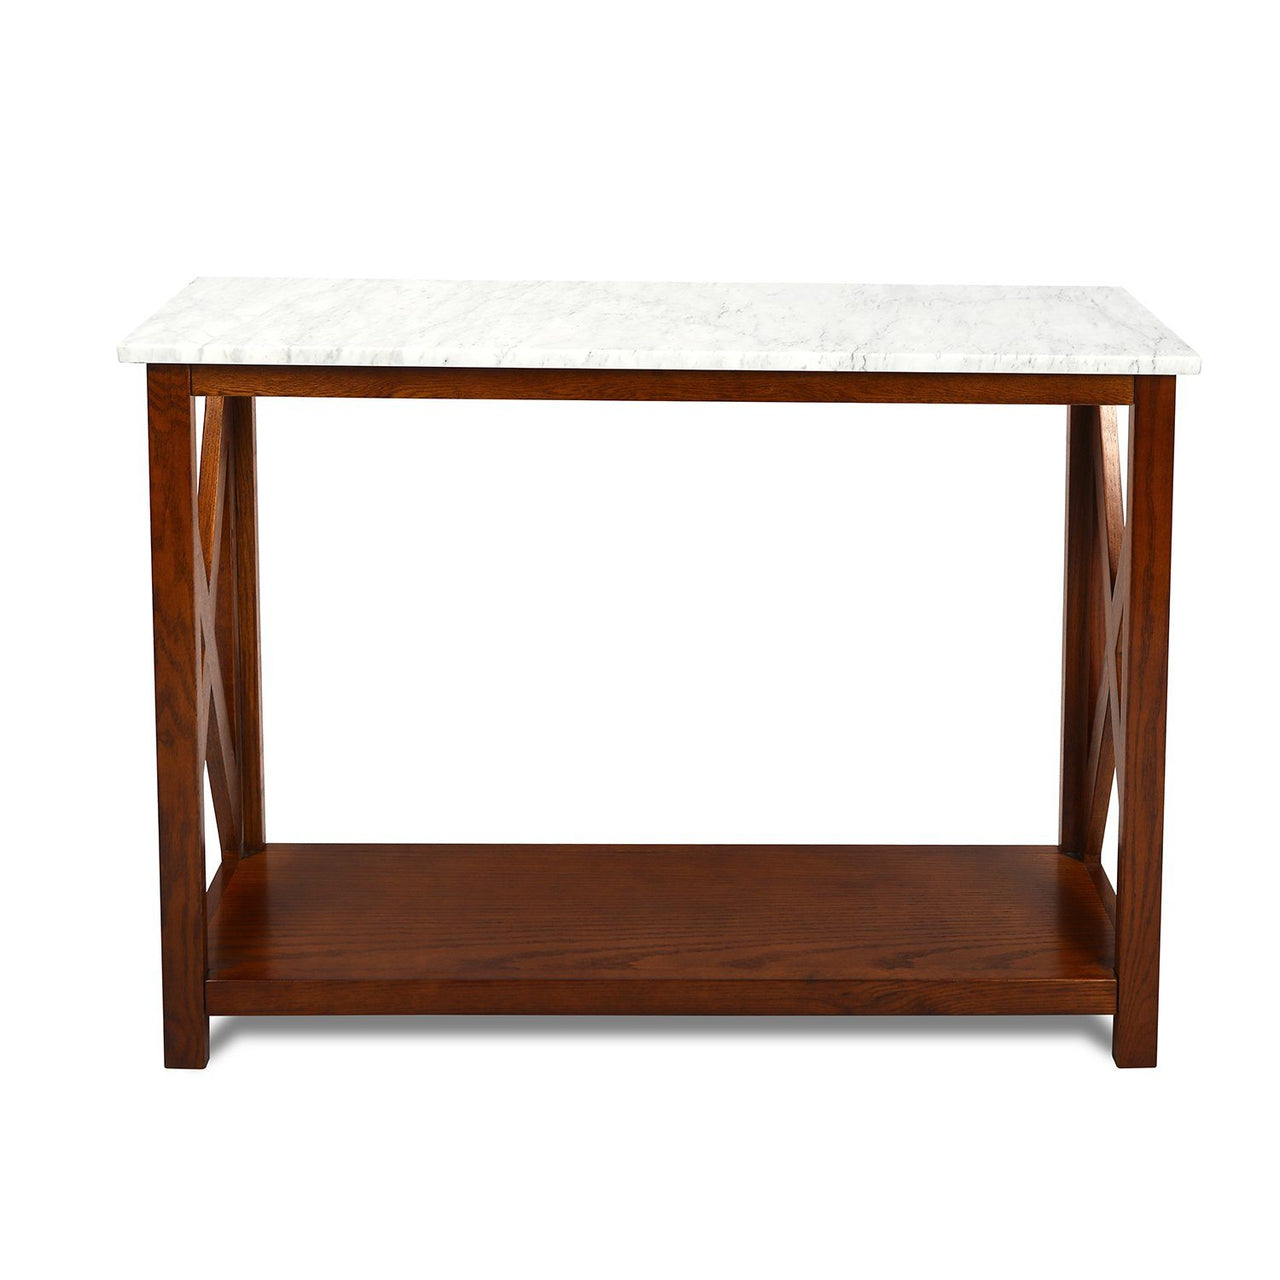 Agatha 39" Rectangular Italian Carrara White Marble Console Table with Color Solid Wood Legs Writing Desk The Bianco Collection Walnut 